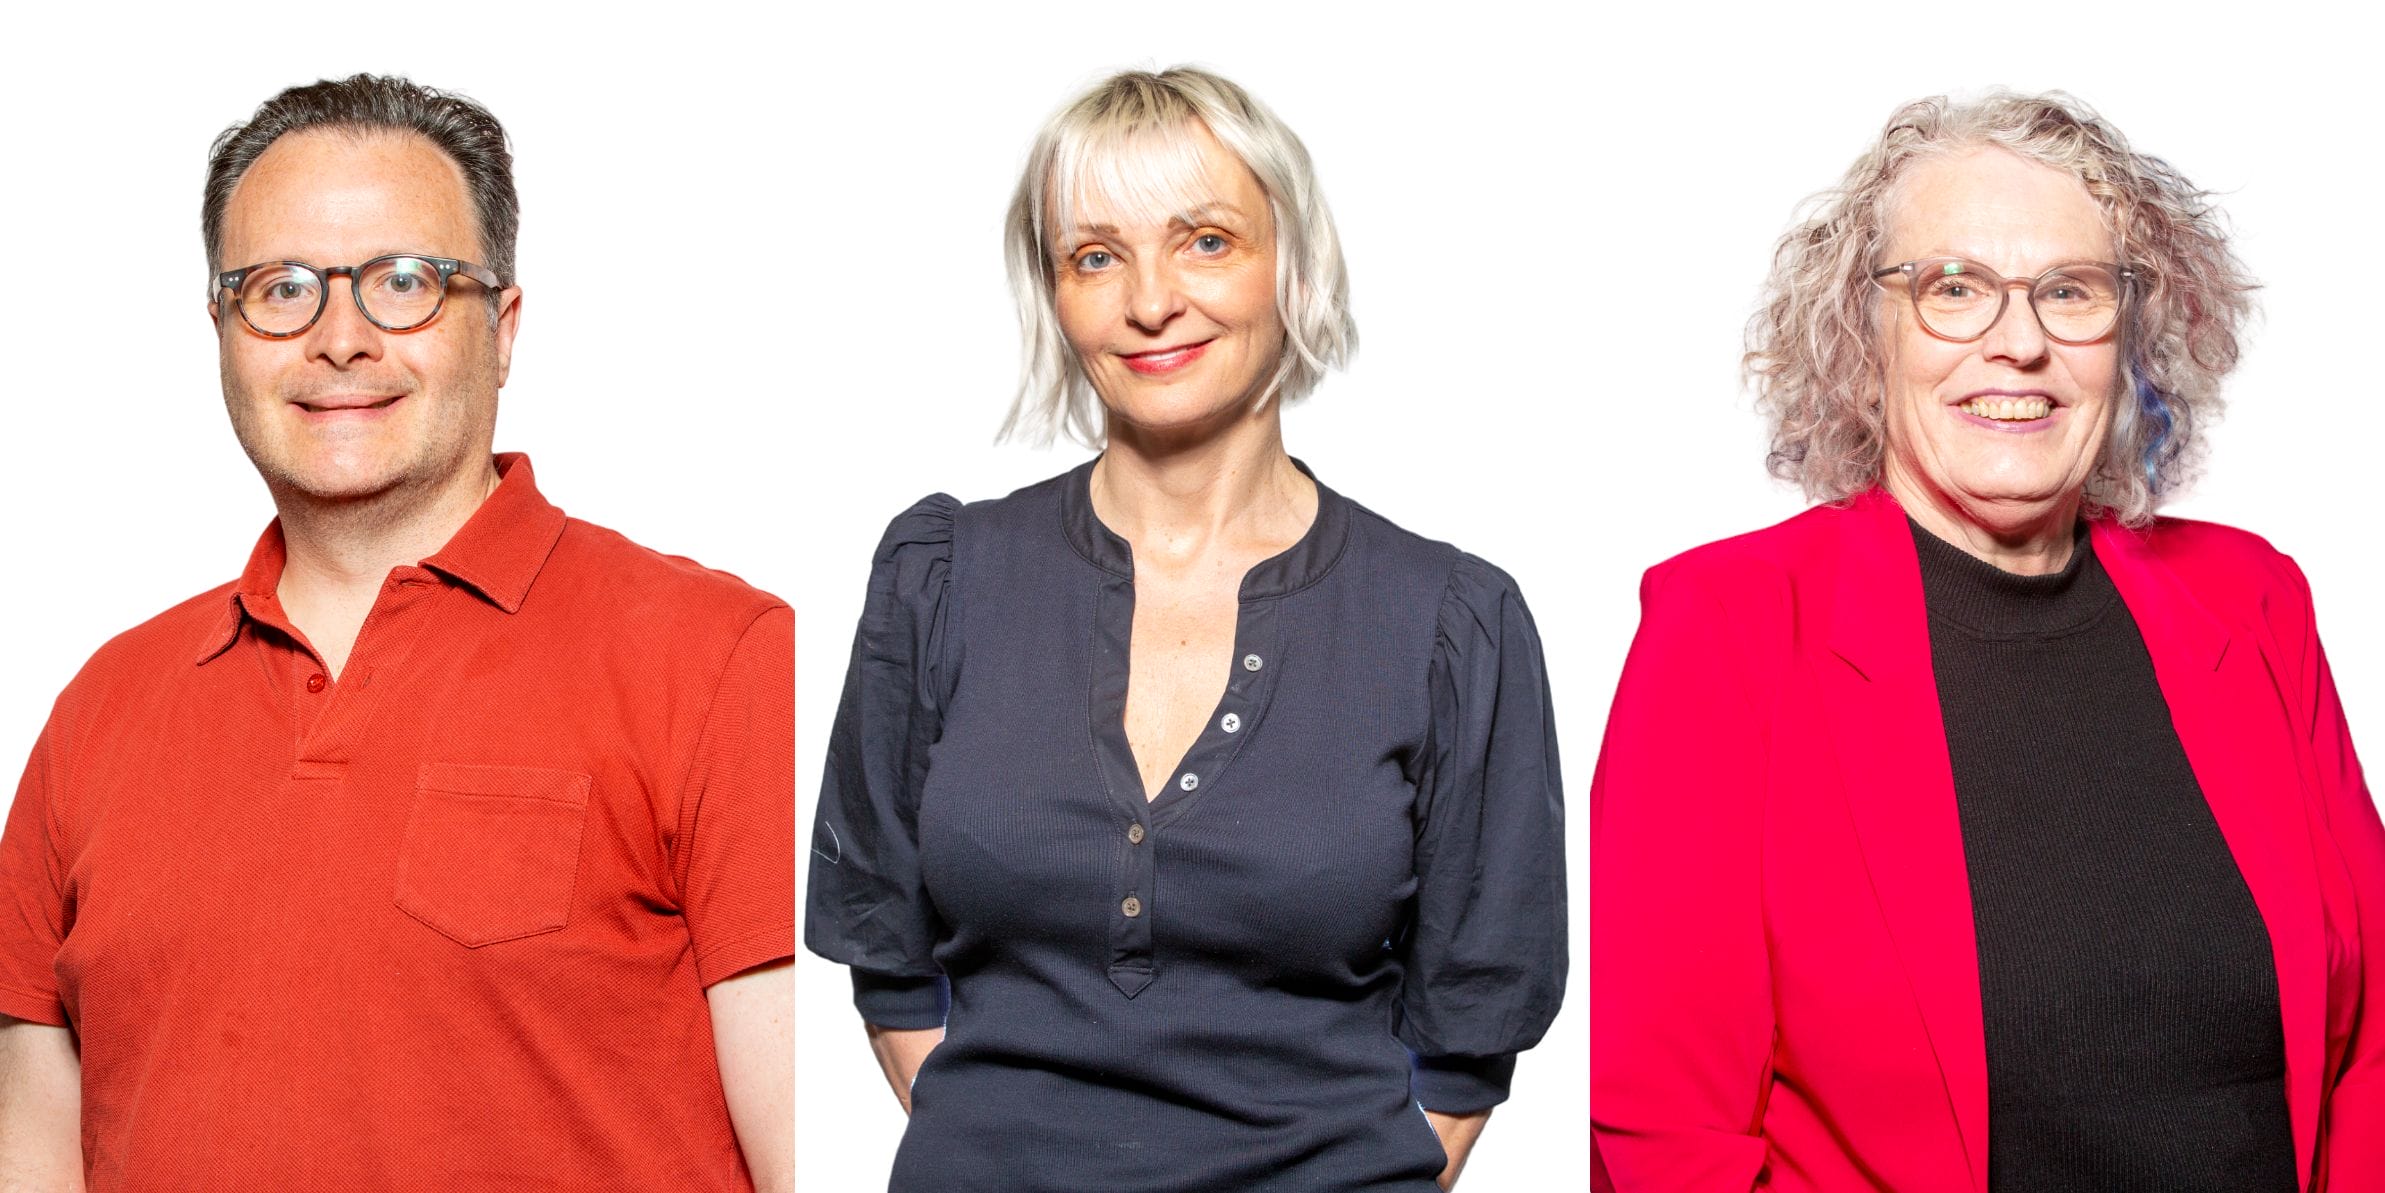 Three people standing side by side against a white background, each smiling at the camera, dressed in colorful tops.